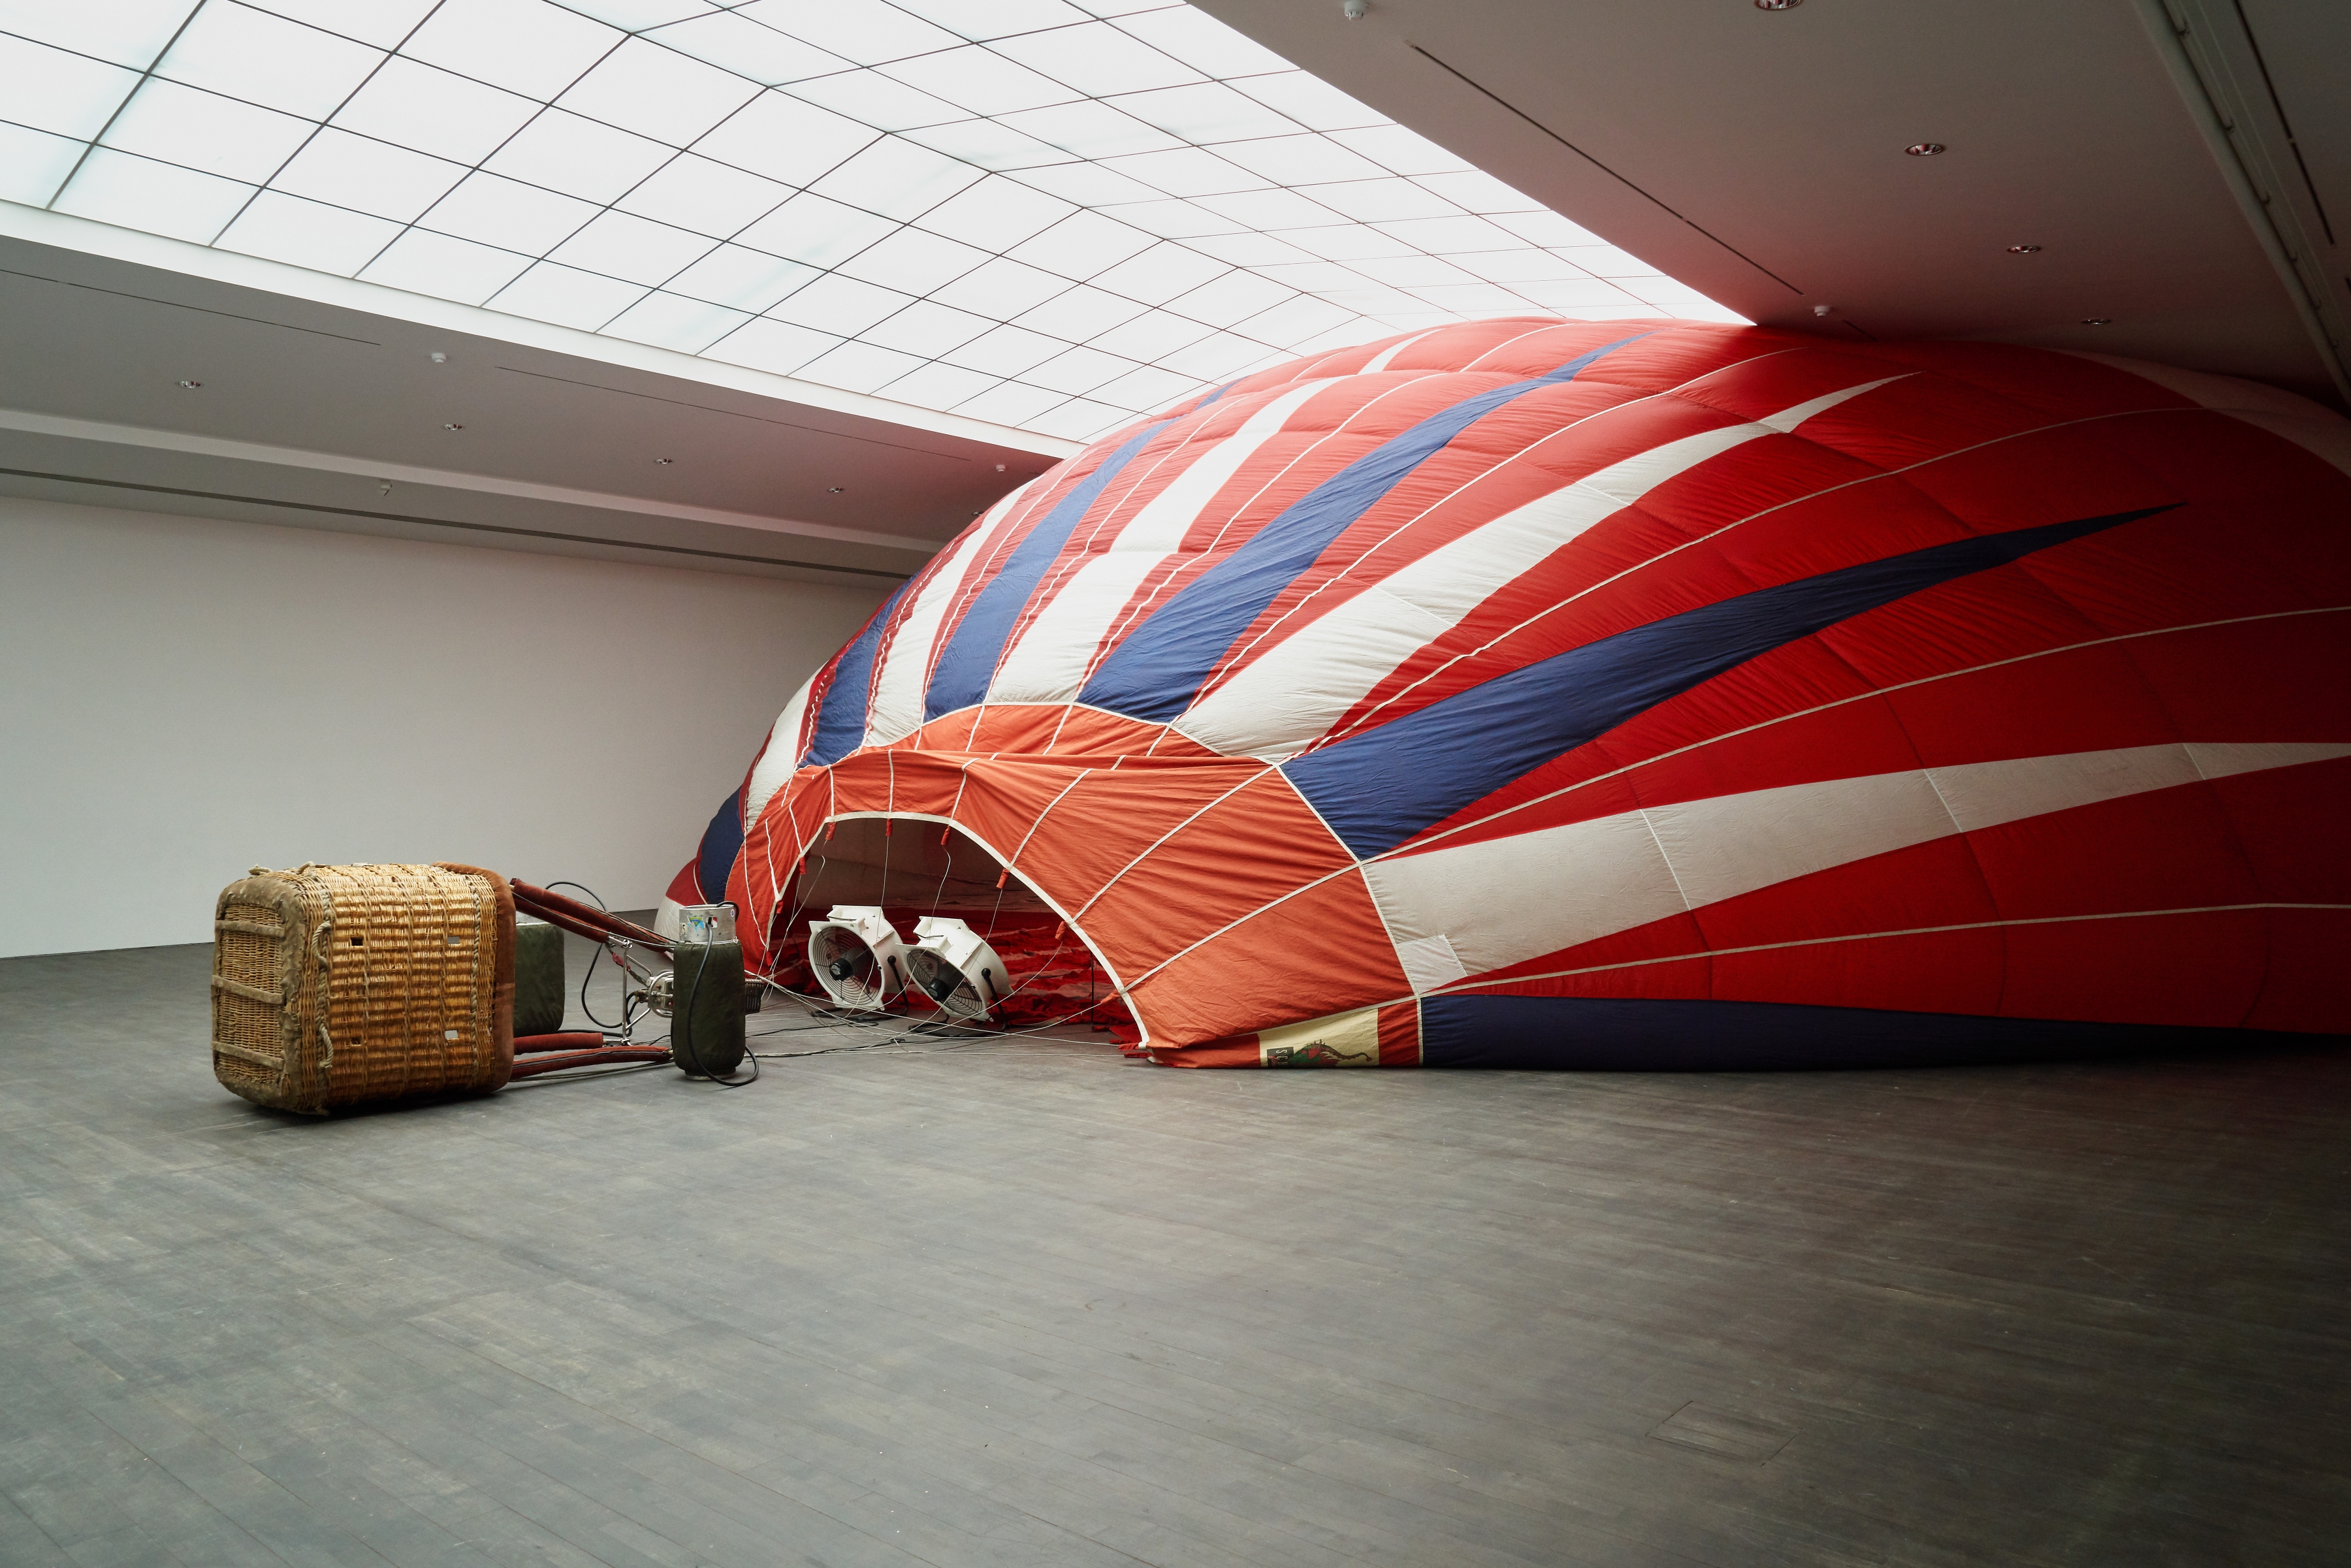 T.Y.F.F.S.H., 2009

hot air balloon, ventilators

&nbsp;



The dream of flying and drifting with the wind is captured in the museum.
&nbsp;

&nbsp;